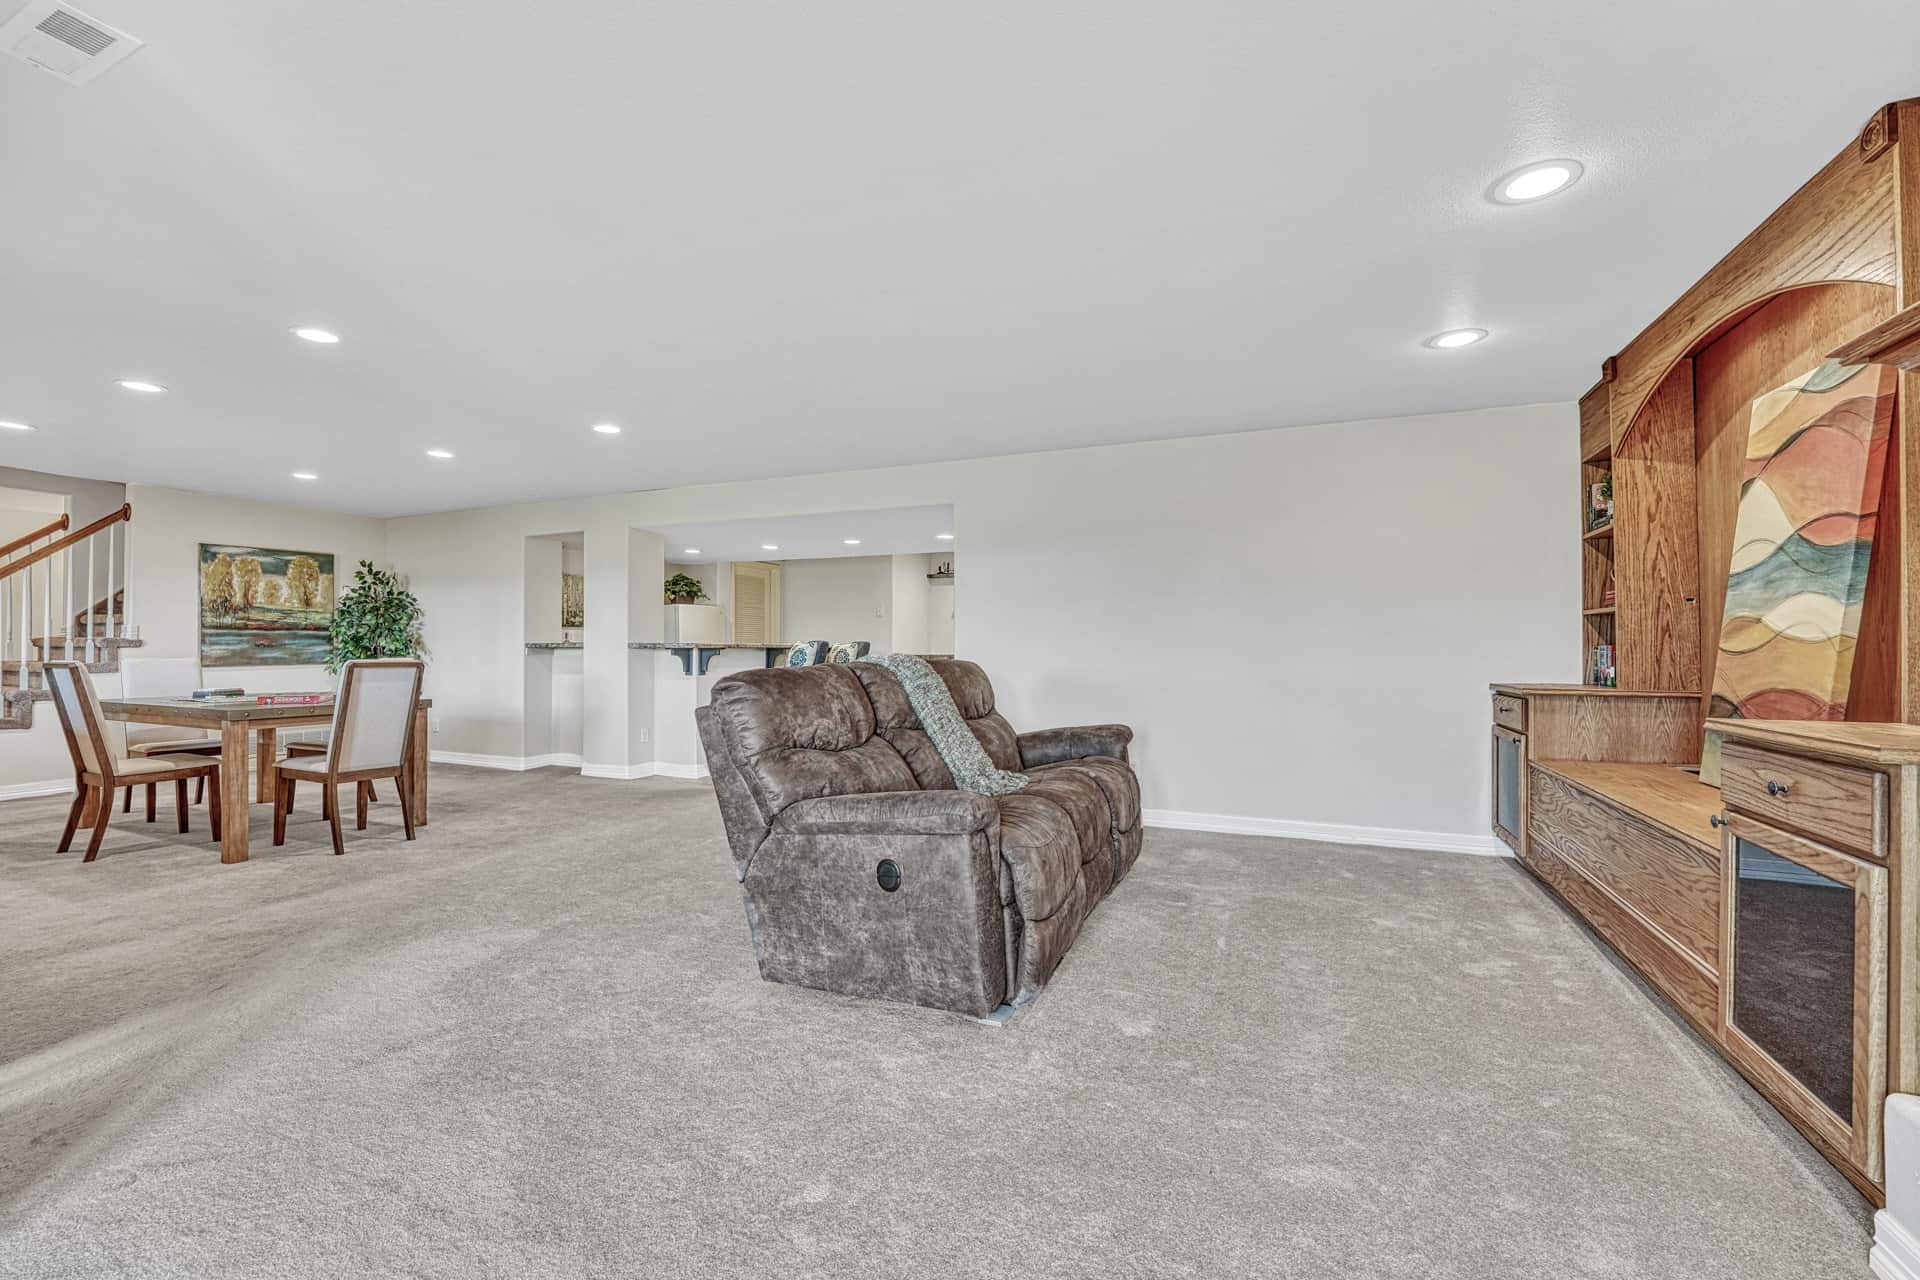 Basement TV Area with Built In Entertainment Center